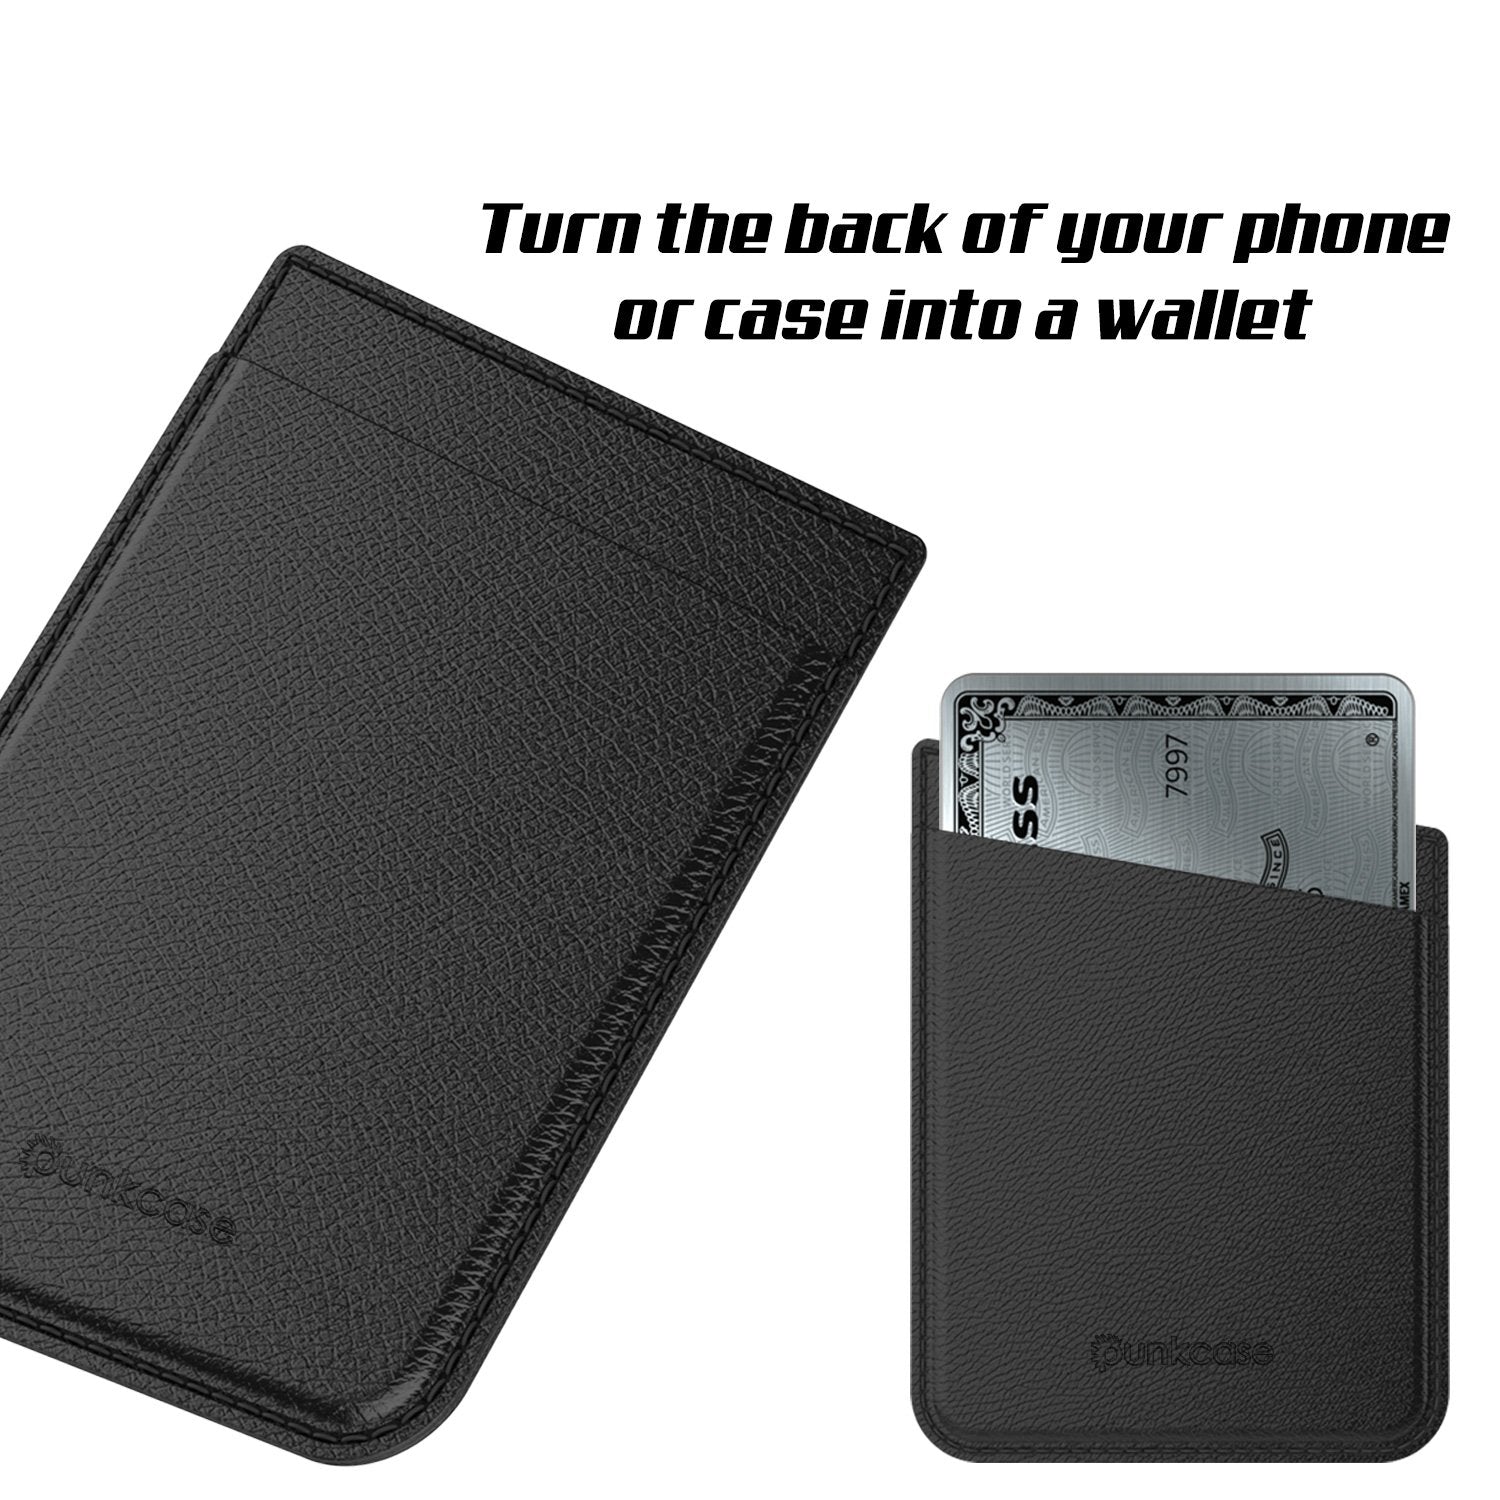 PunkCase CardStud Deluxe Stick On Wallet | Adhesive Card Holder Attachment for Back of iPhone, Android & More | Leather Pouch | [Black] - PunkCase NZ